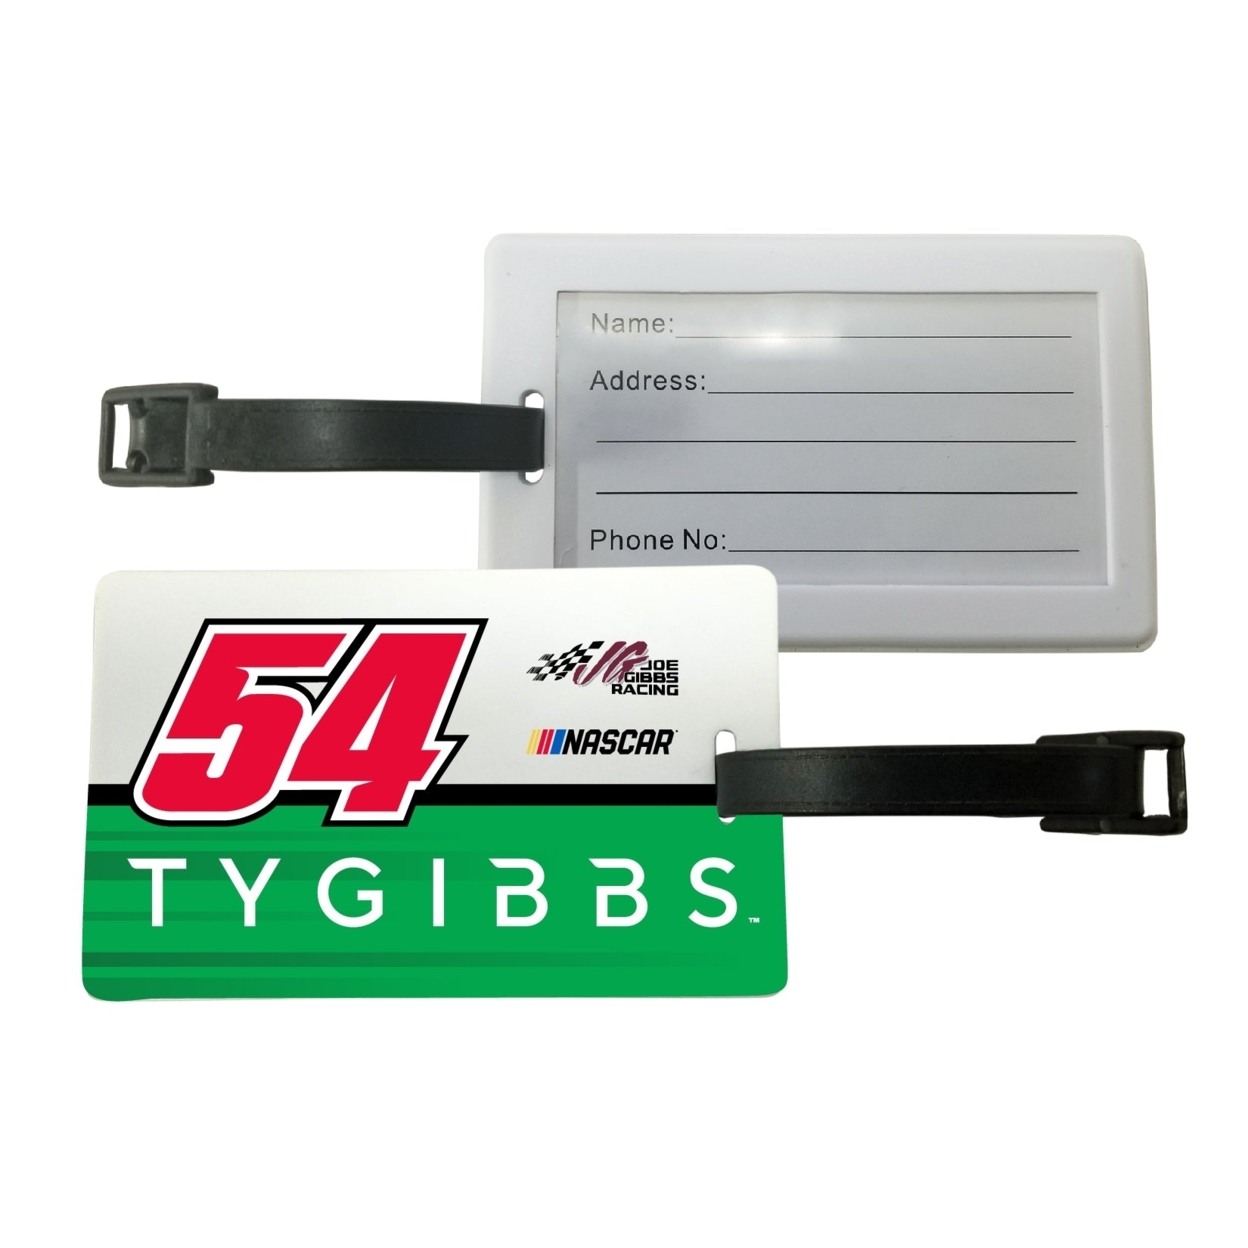 #54 Ty Gibbs Officially Licensed Luggage Tag